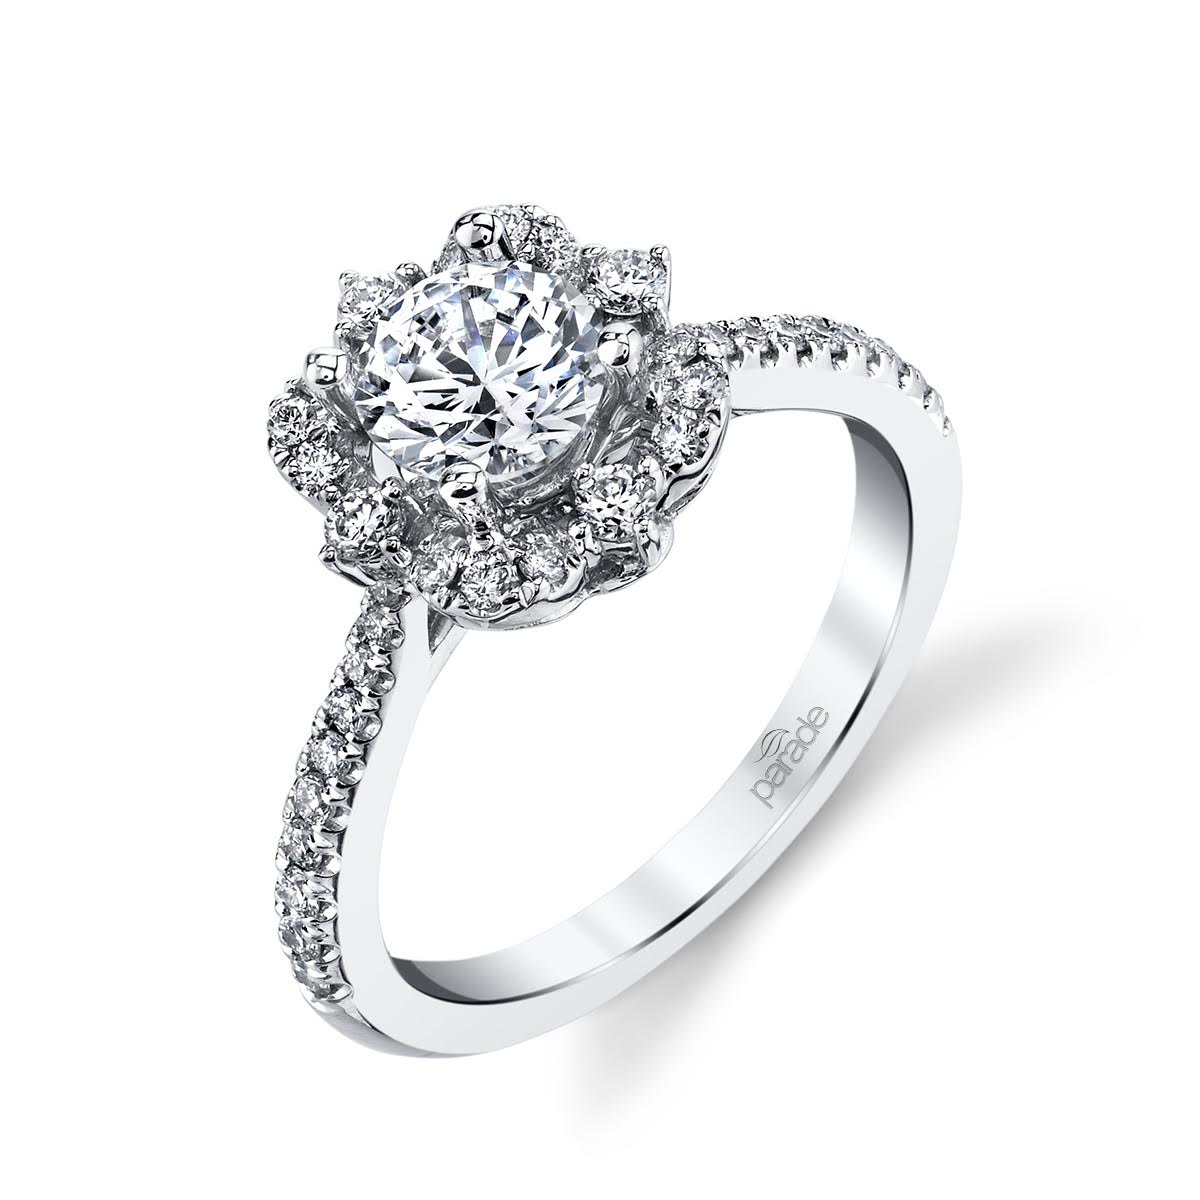 Floral-Inspired Engagement Ring - Michael E. Minden Diamond Jewelers